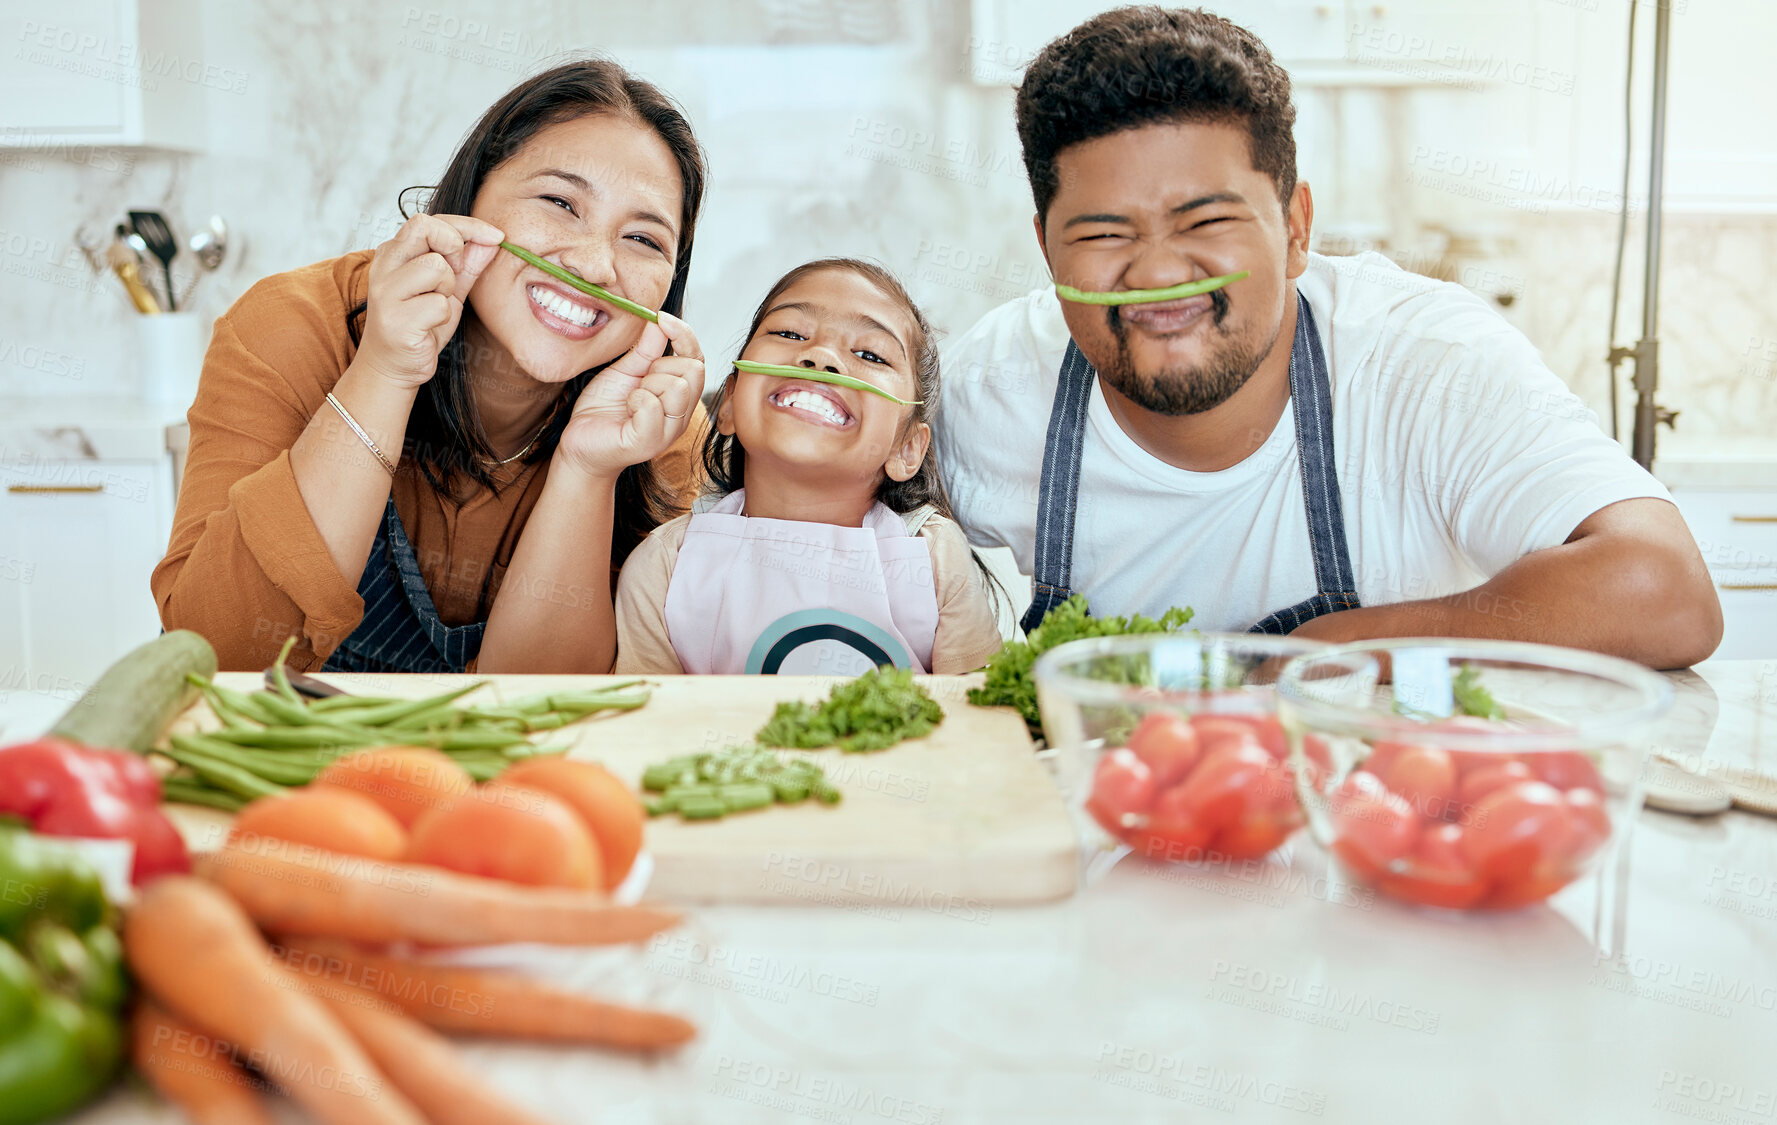 Buy stock photo Cooking, family and comic portrait in kitchen for crazy, goofy and silly fun together with smile. Food, asian and bonding with funny vegetable face of happy mother, father and child in house.

